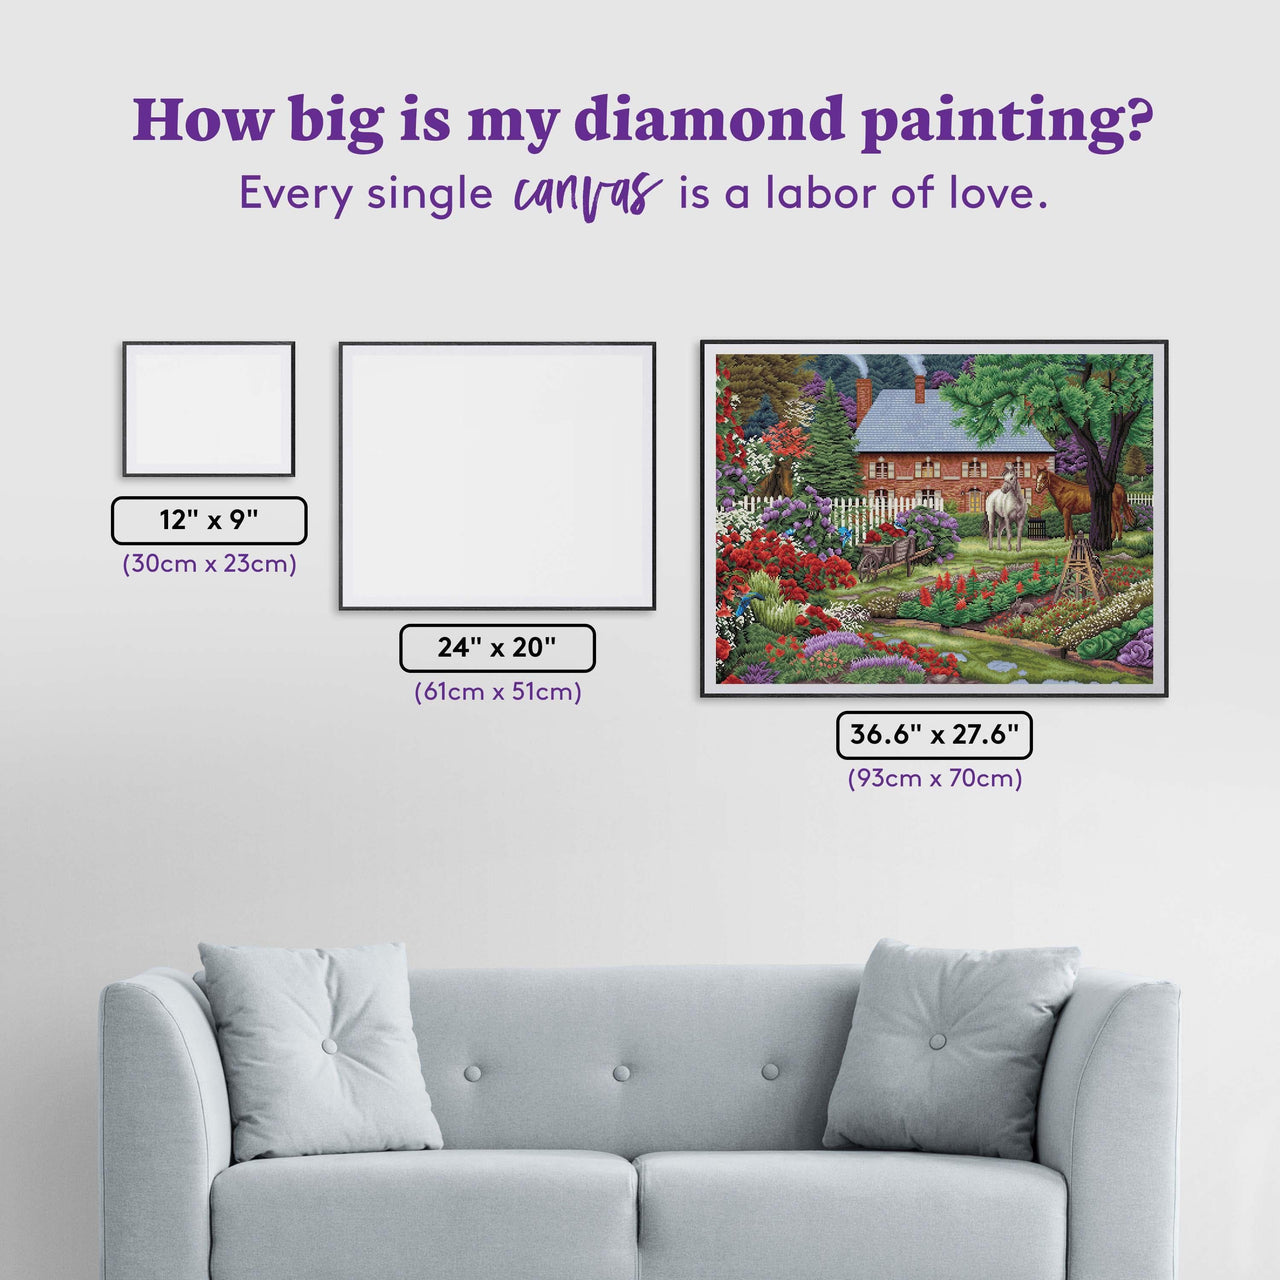 Diamond Painting The Sweet Garden 36.6" x 27.6" (93cm x 70cm) / Square With 65 Colors Including 4 ABs and 2 Fairy Dust Diamonds / 104,813